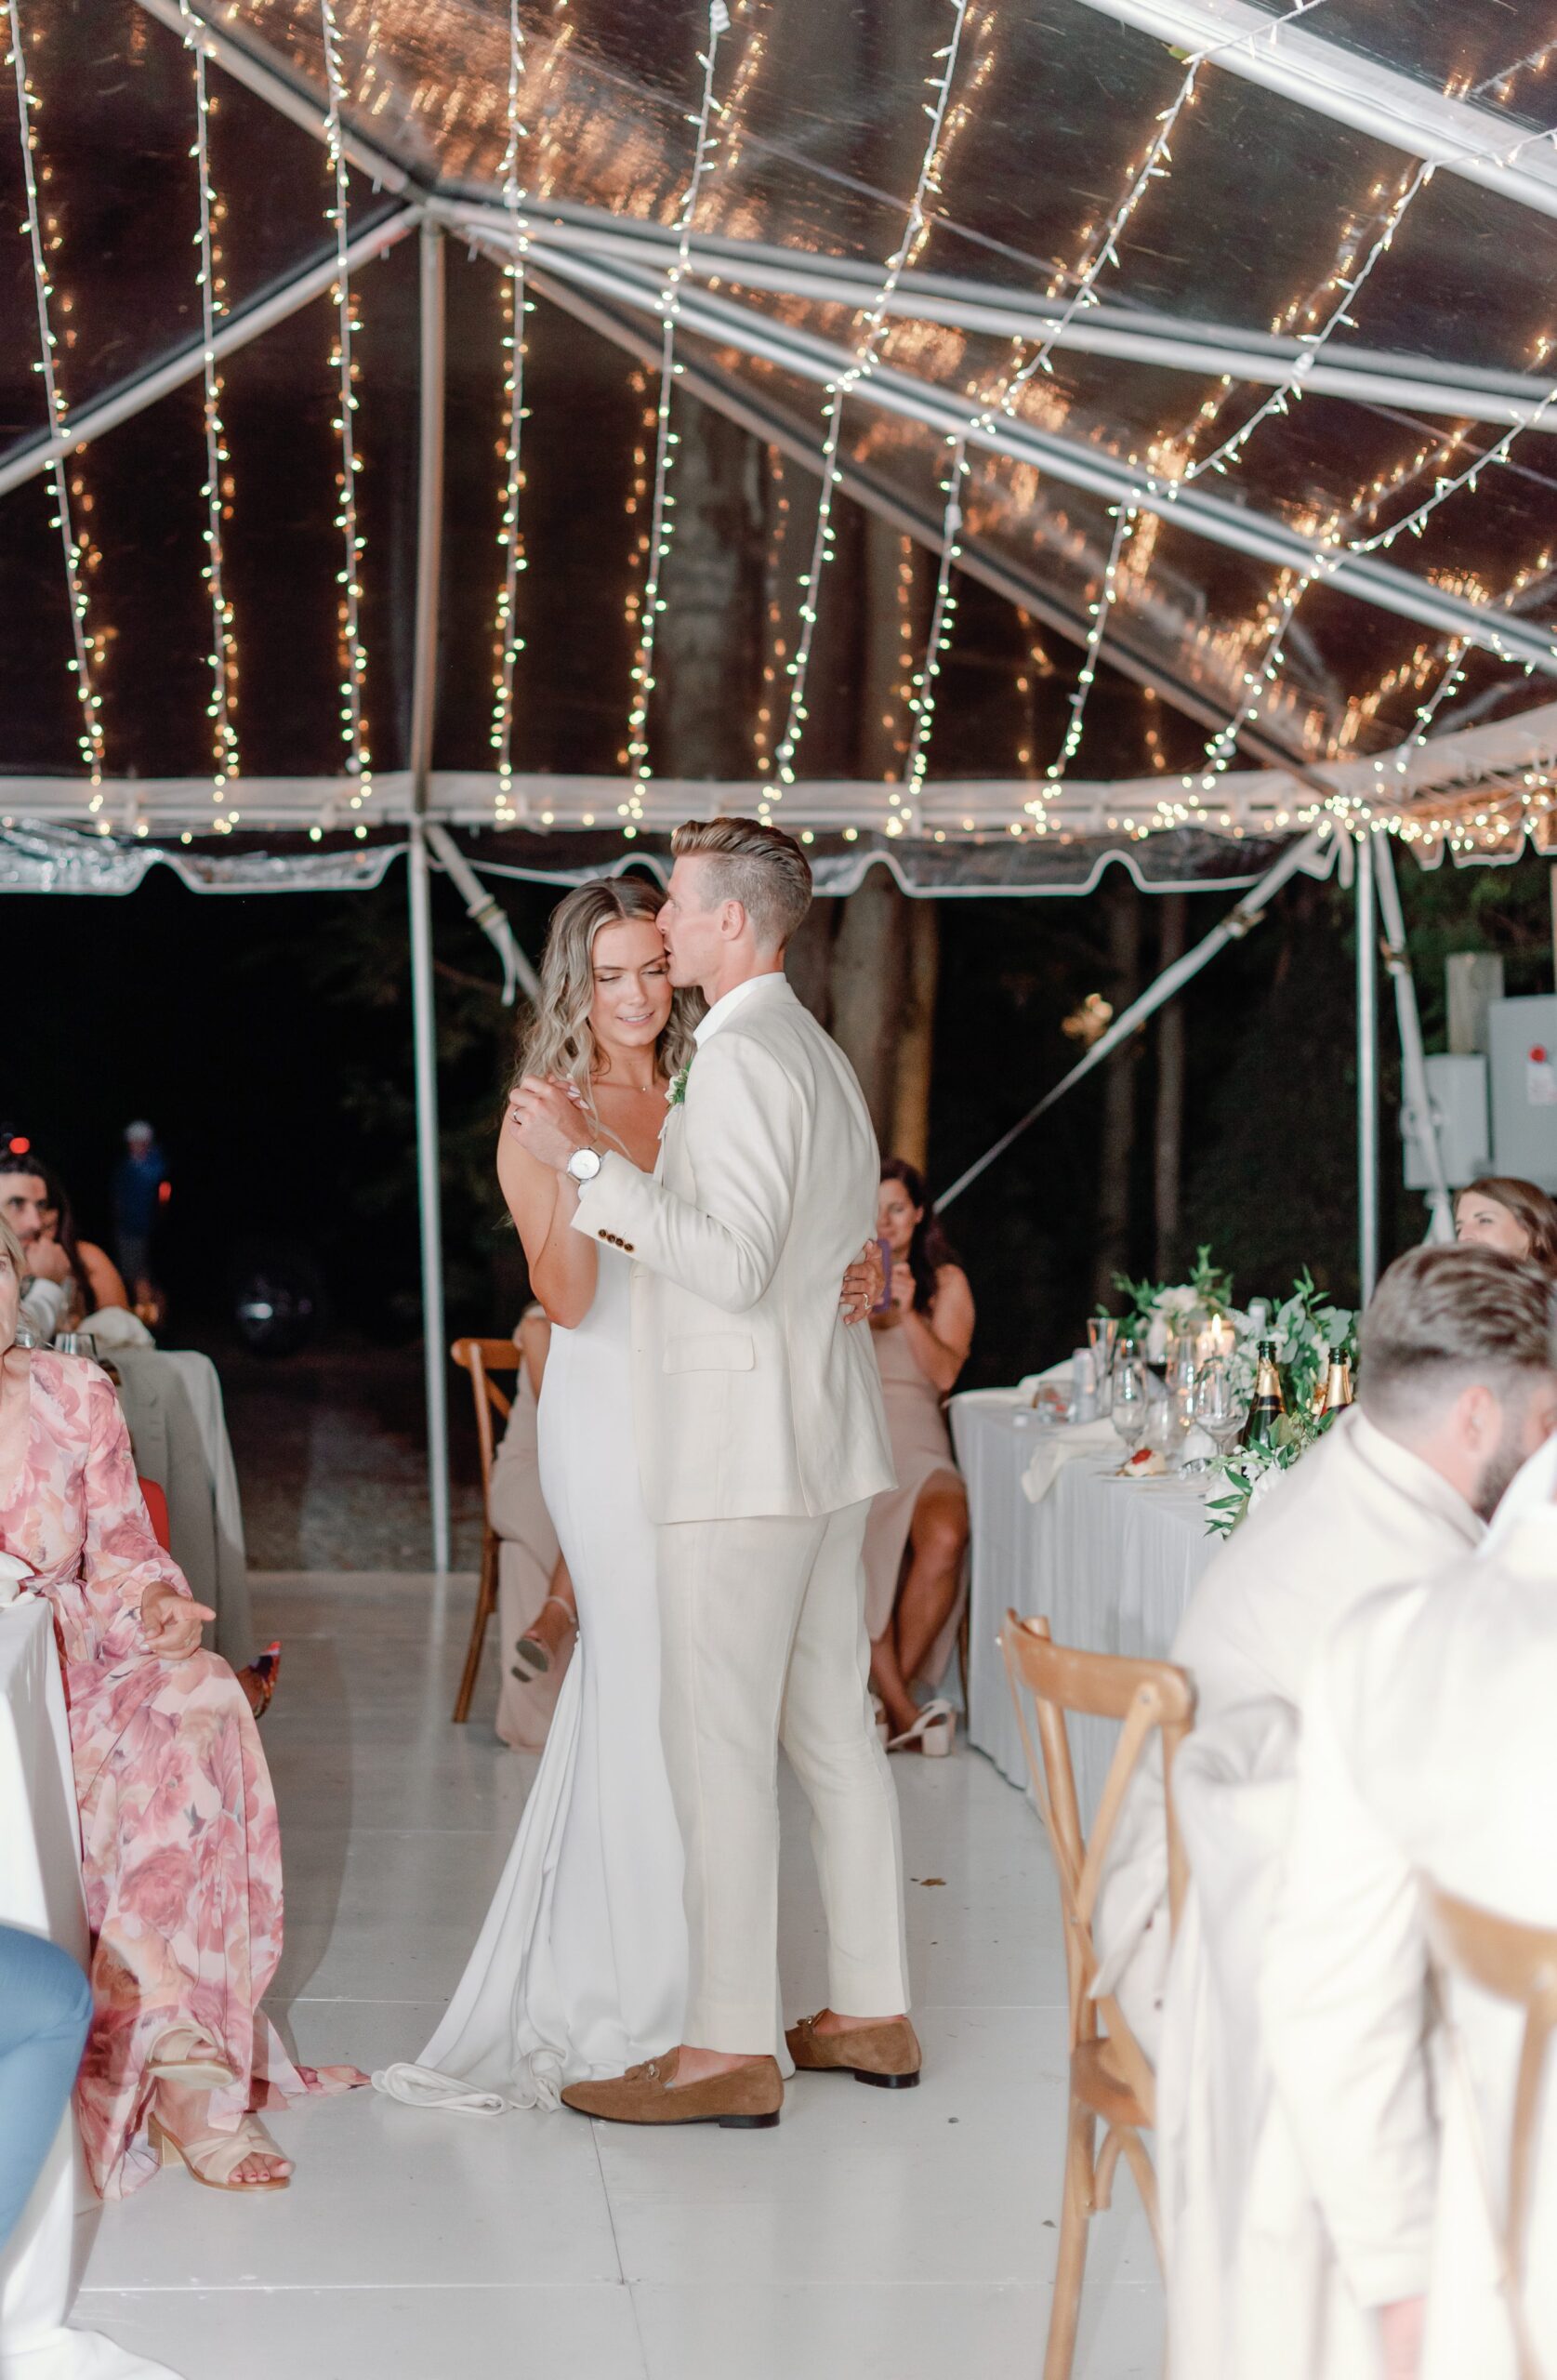 First dance under clear wedding tent with string lights.